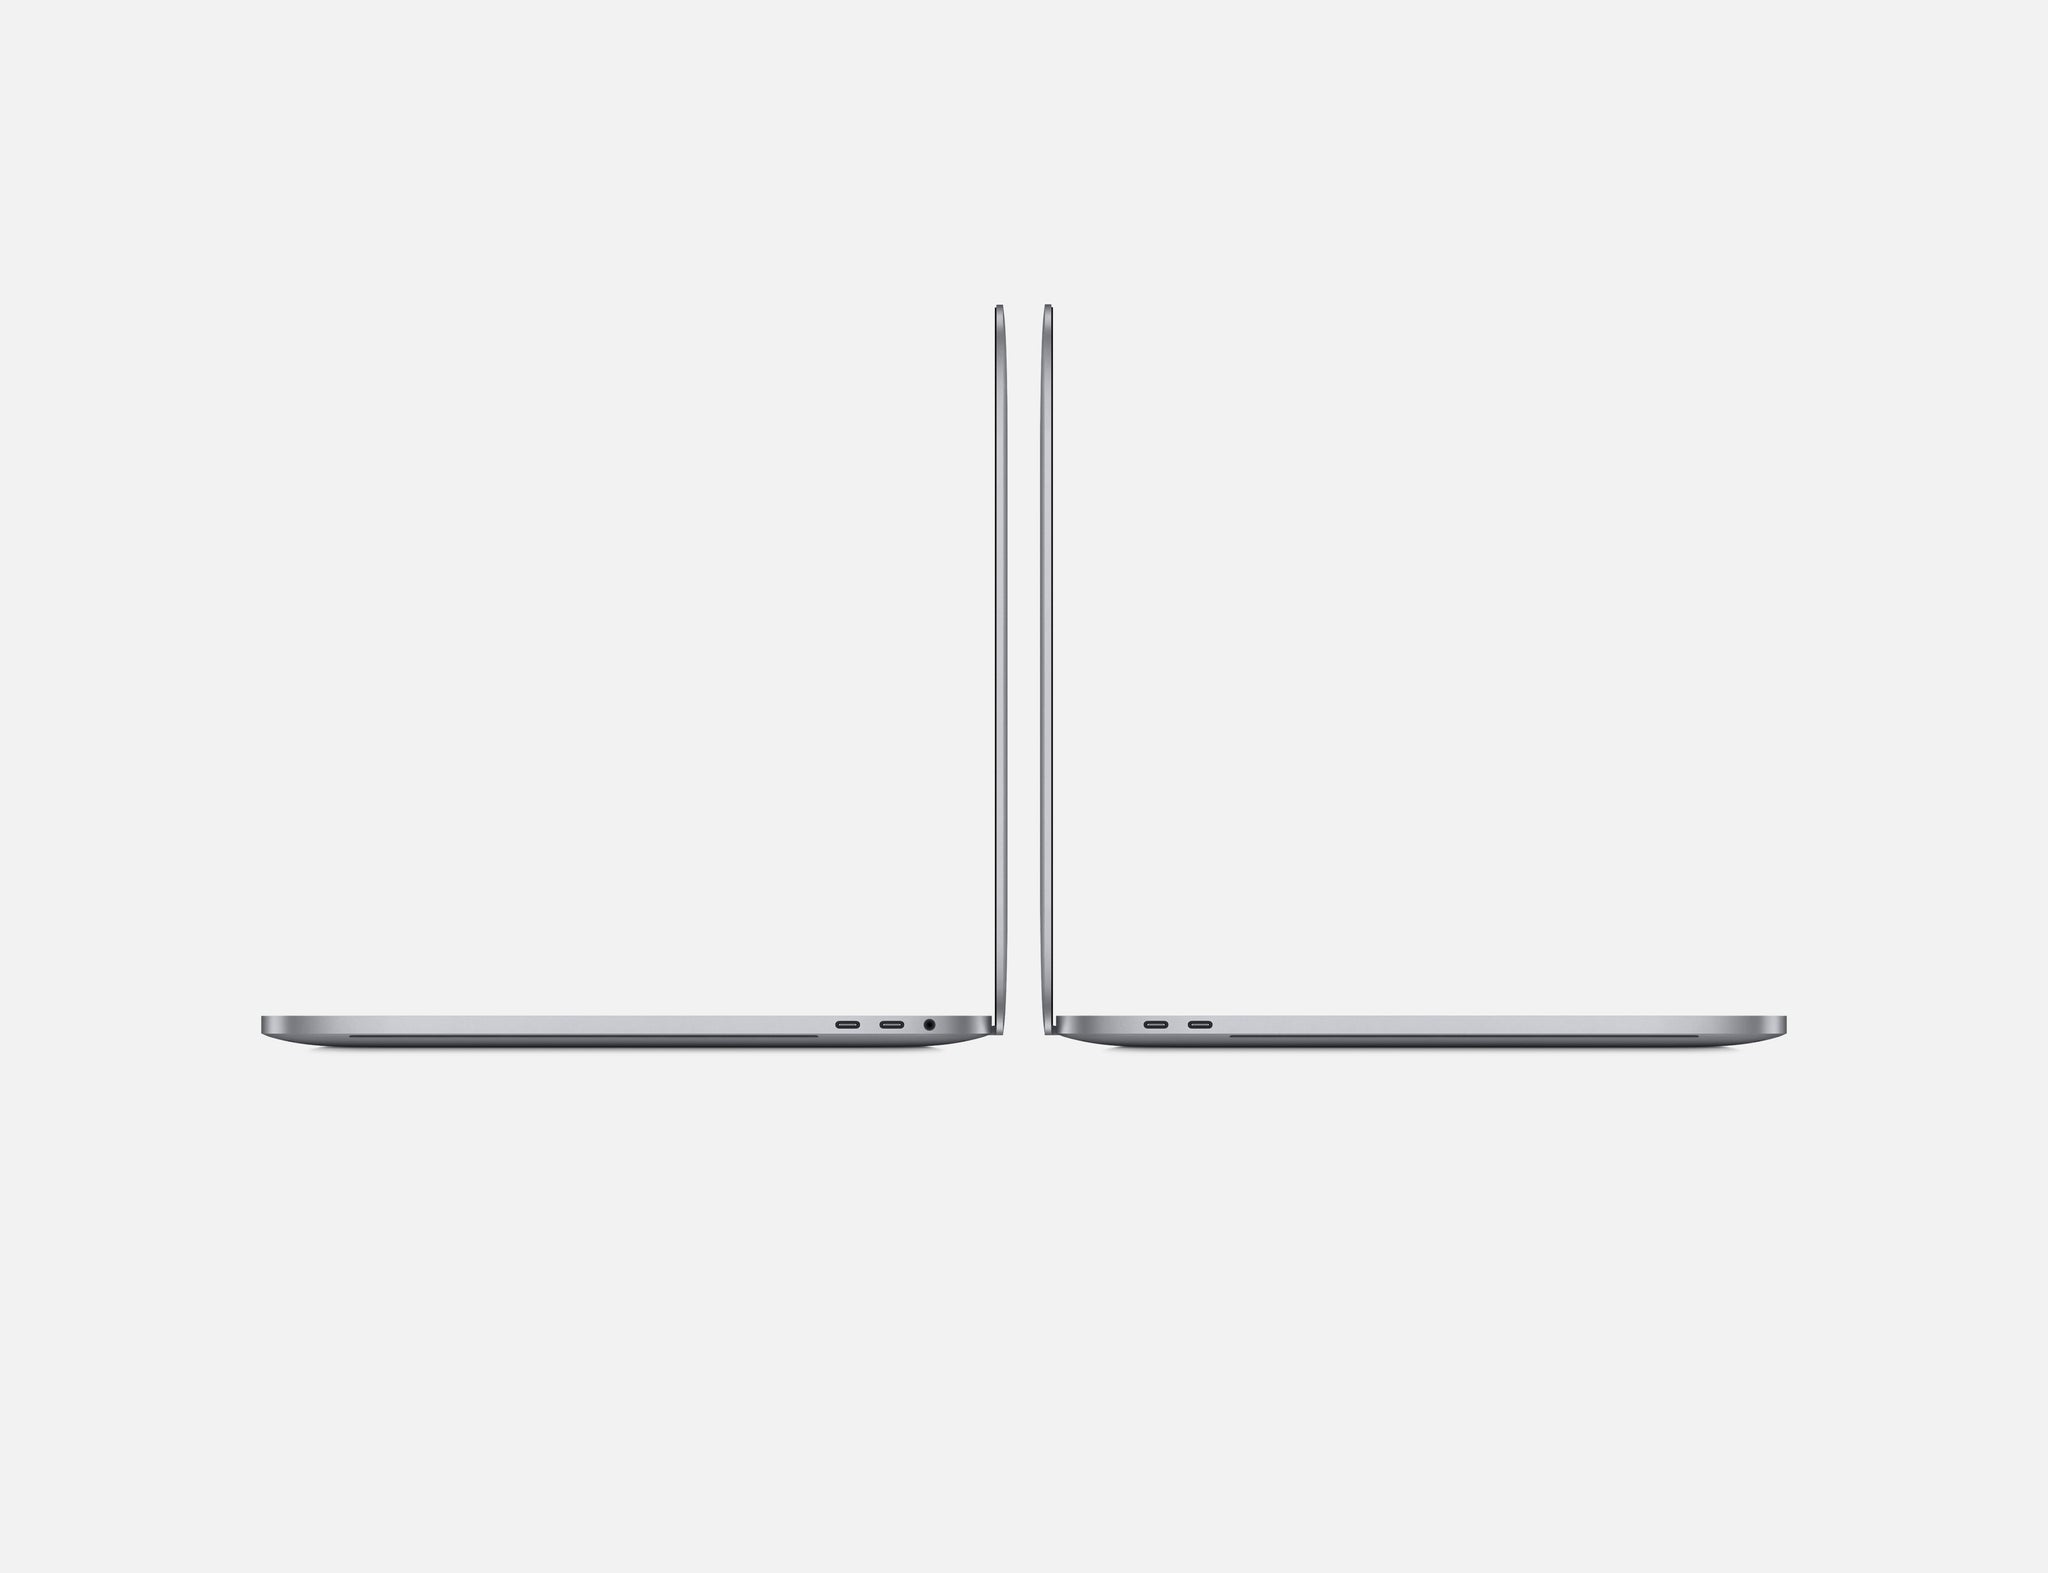 Apple MacBook Pro 16" with Touch Bar,9th-Gen 6-Core Intel Core i9 2.6GHz,16GB RAM,512GBSSD,Late 2019